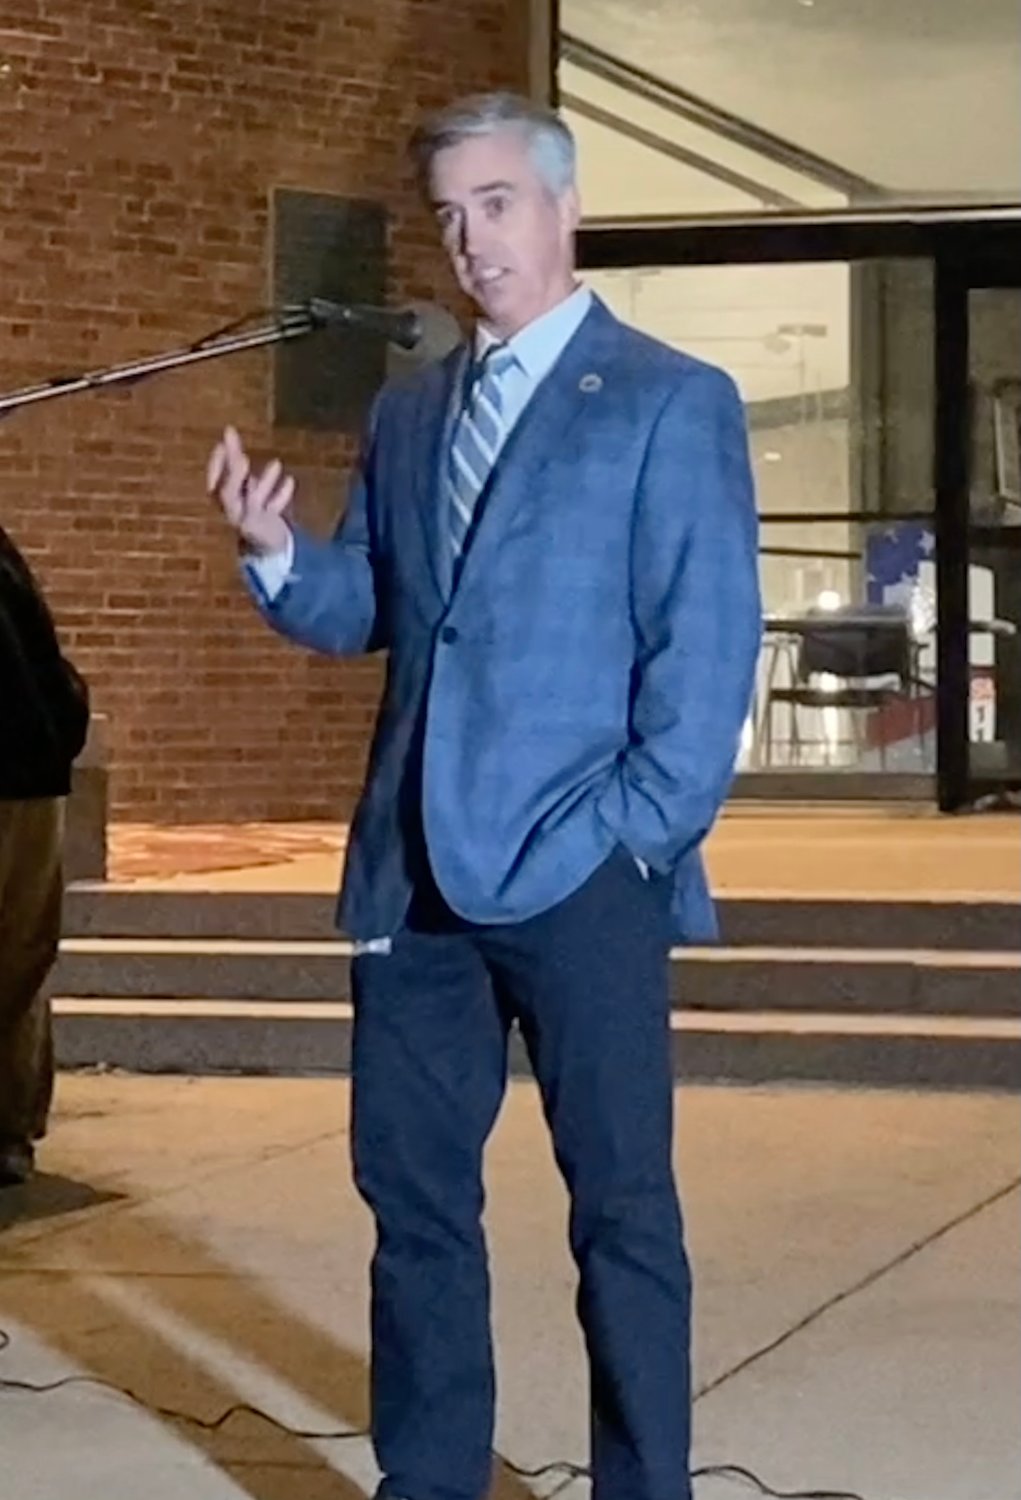 Bucks County Commissioner Chairman Bob Harvie spoke to the crowd at Friday night’s “Vigil for Democracy” marking the second anniversary of the Jan. 6 insurrection.